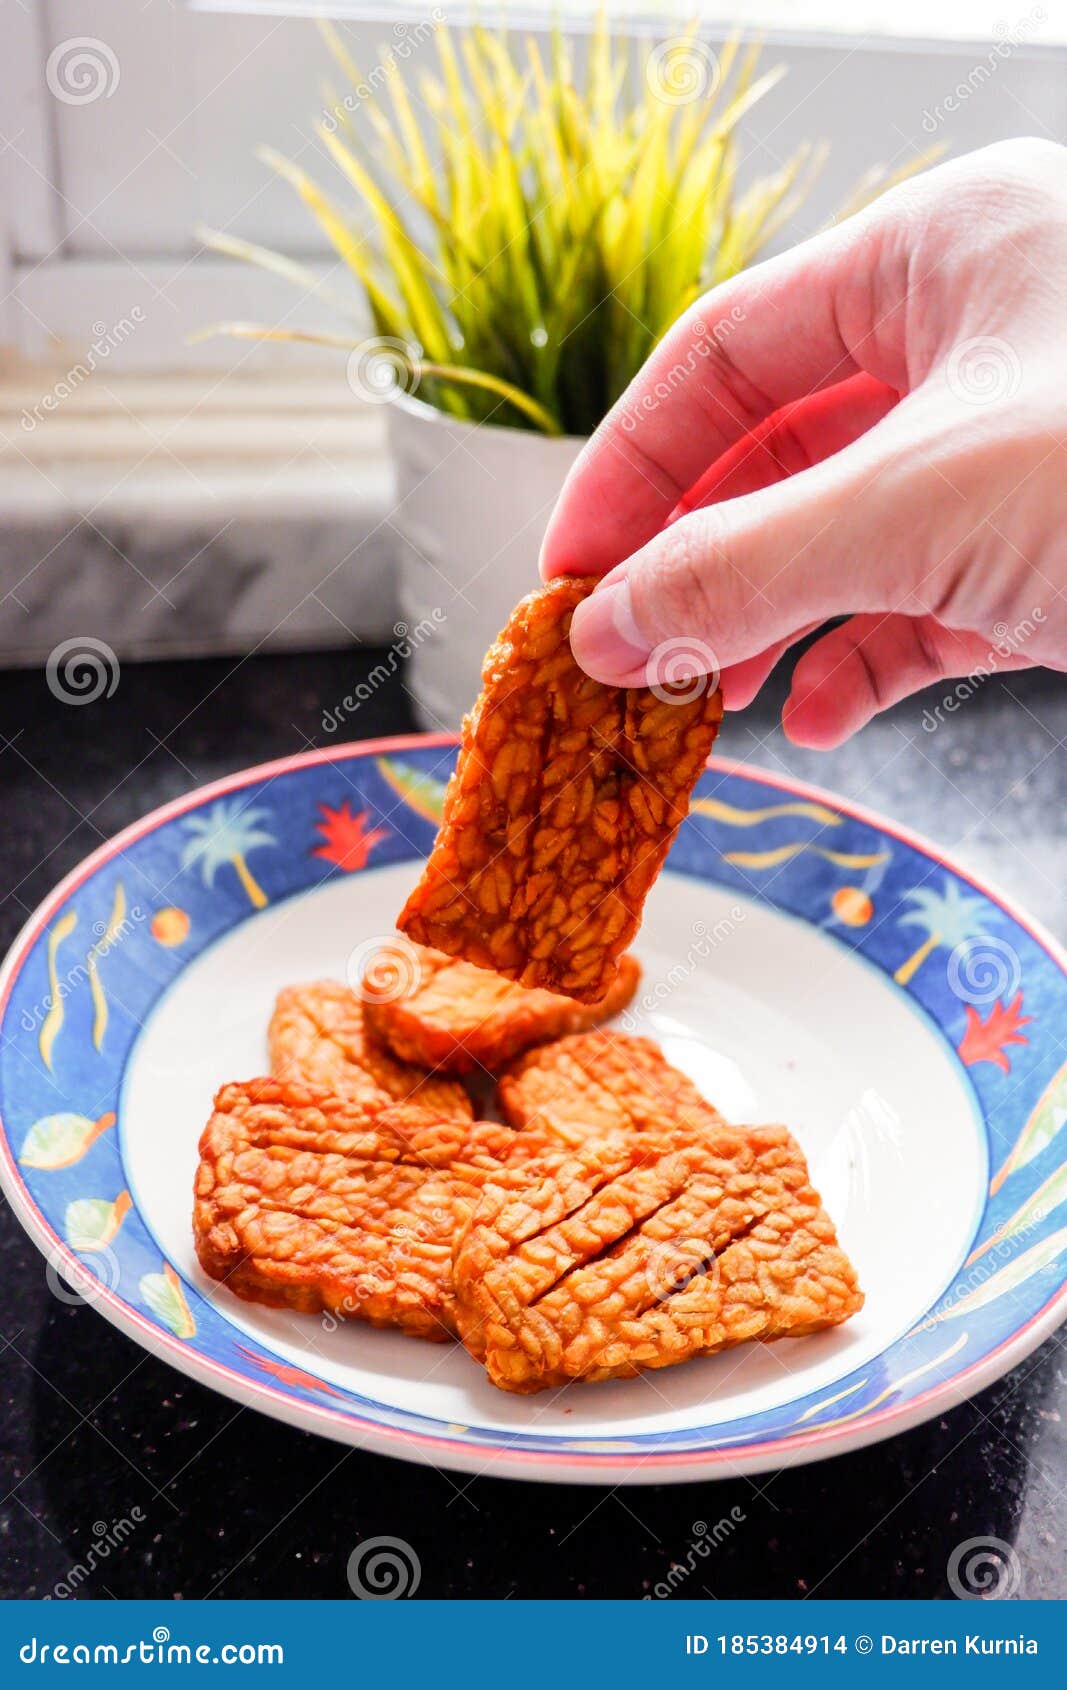 fried tempeh / tempe held by hand, indonesians usually eat these savory snacks using their hand. tempeh a traditional indonesian s